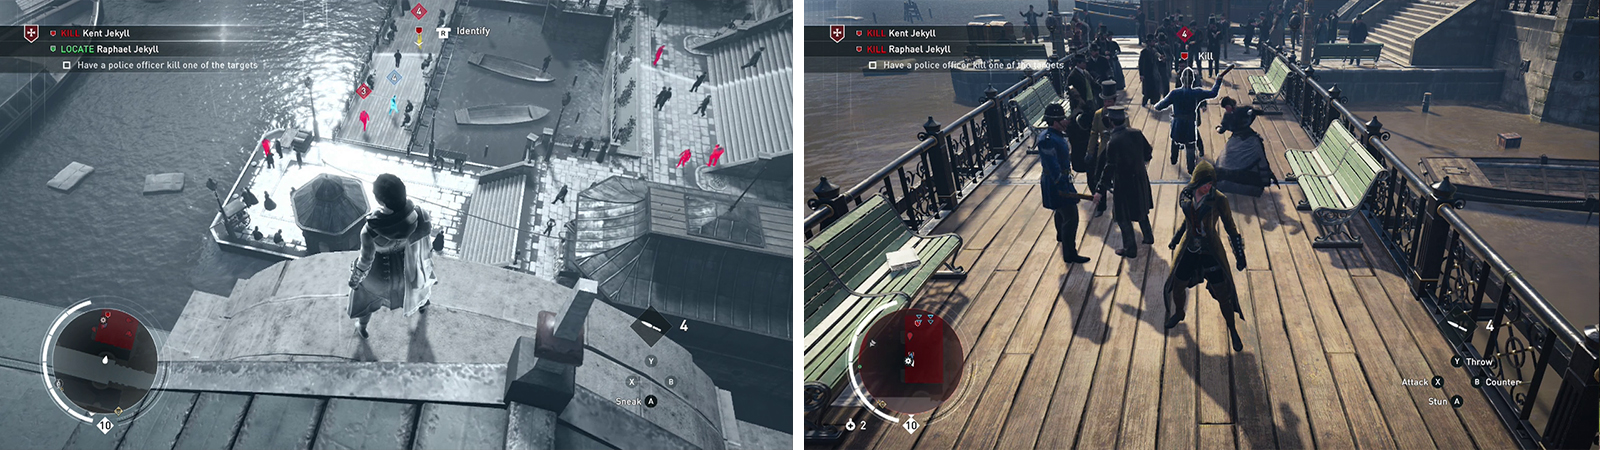 Use Eagle Vision to tag enemies/targets (left). Allow one of the targets to attack you and the police will attack them (right).